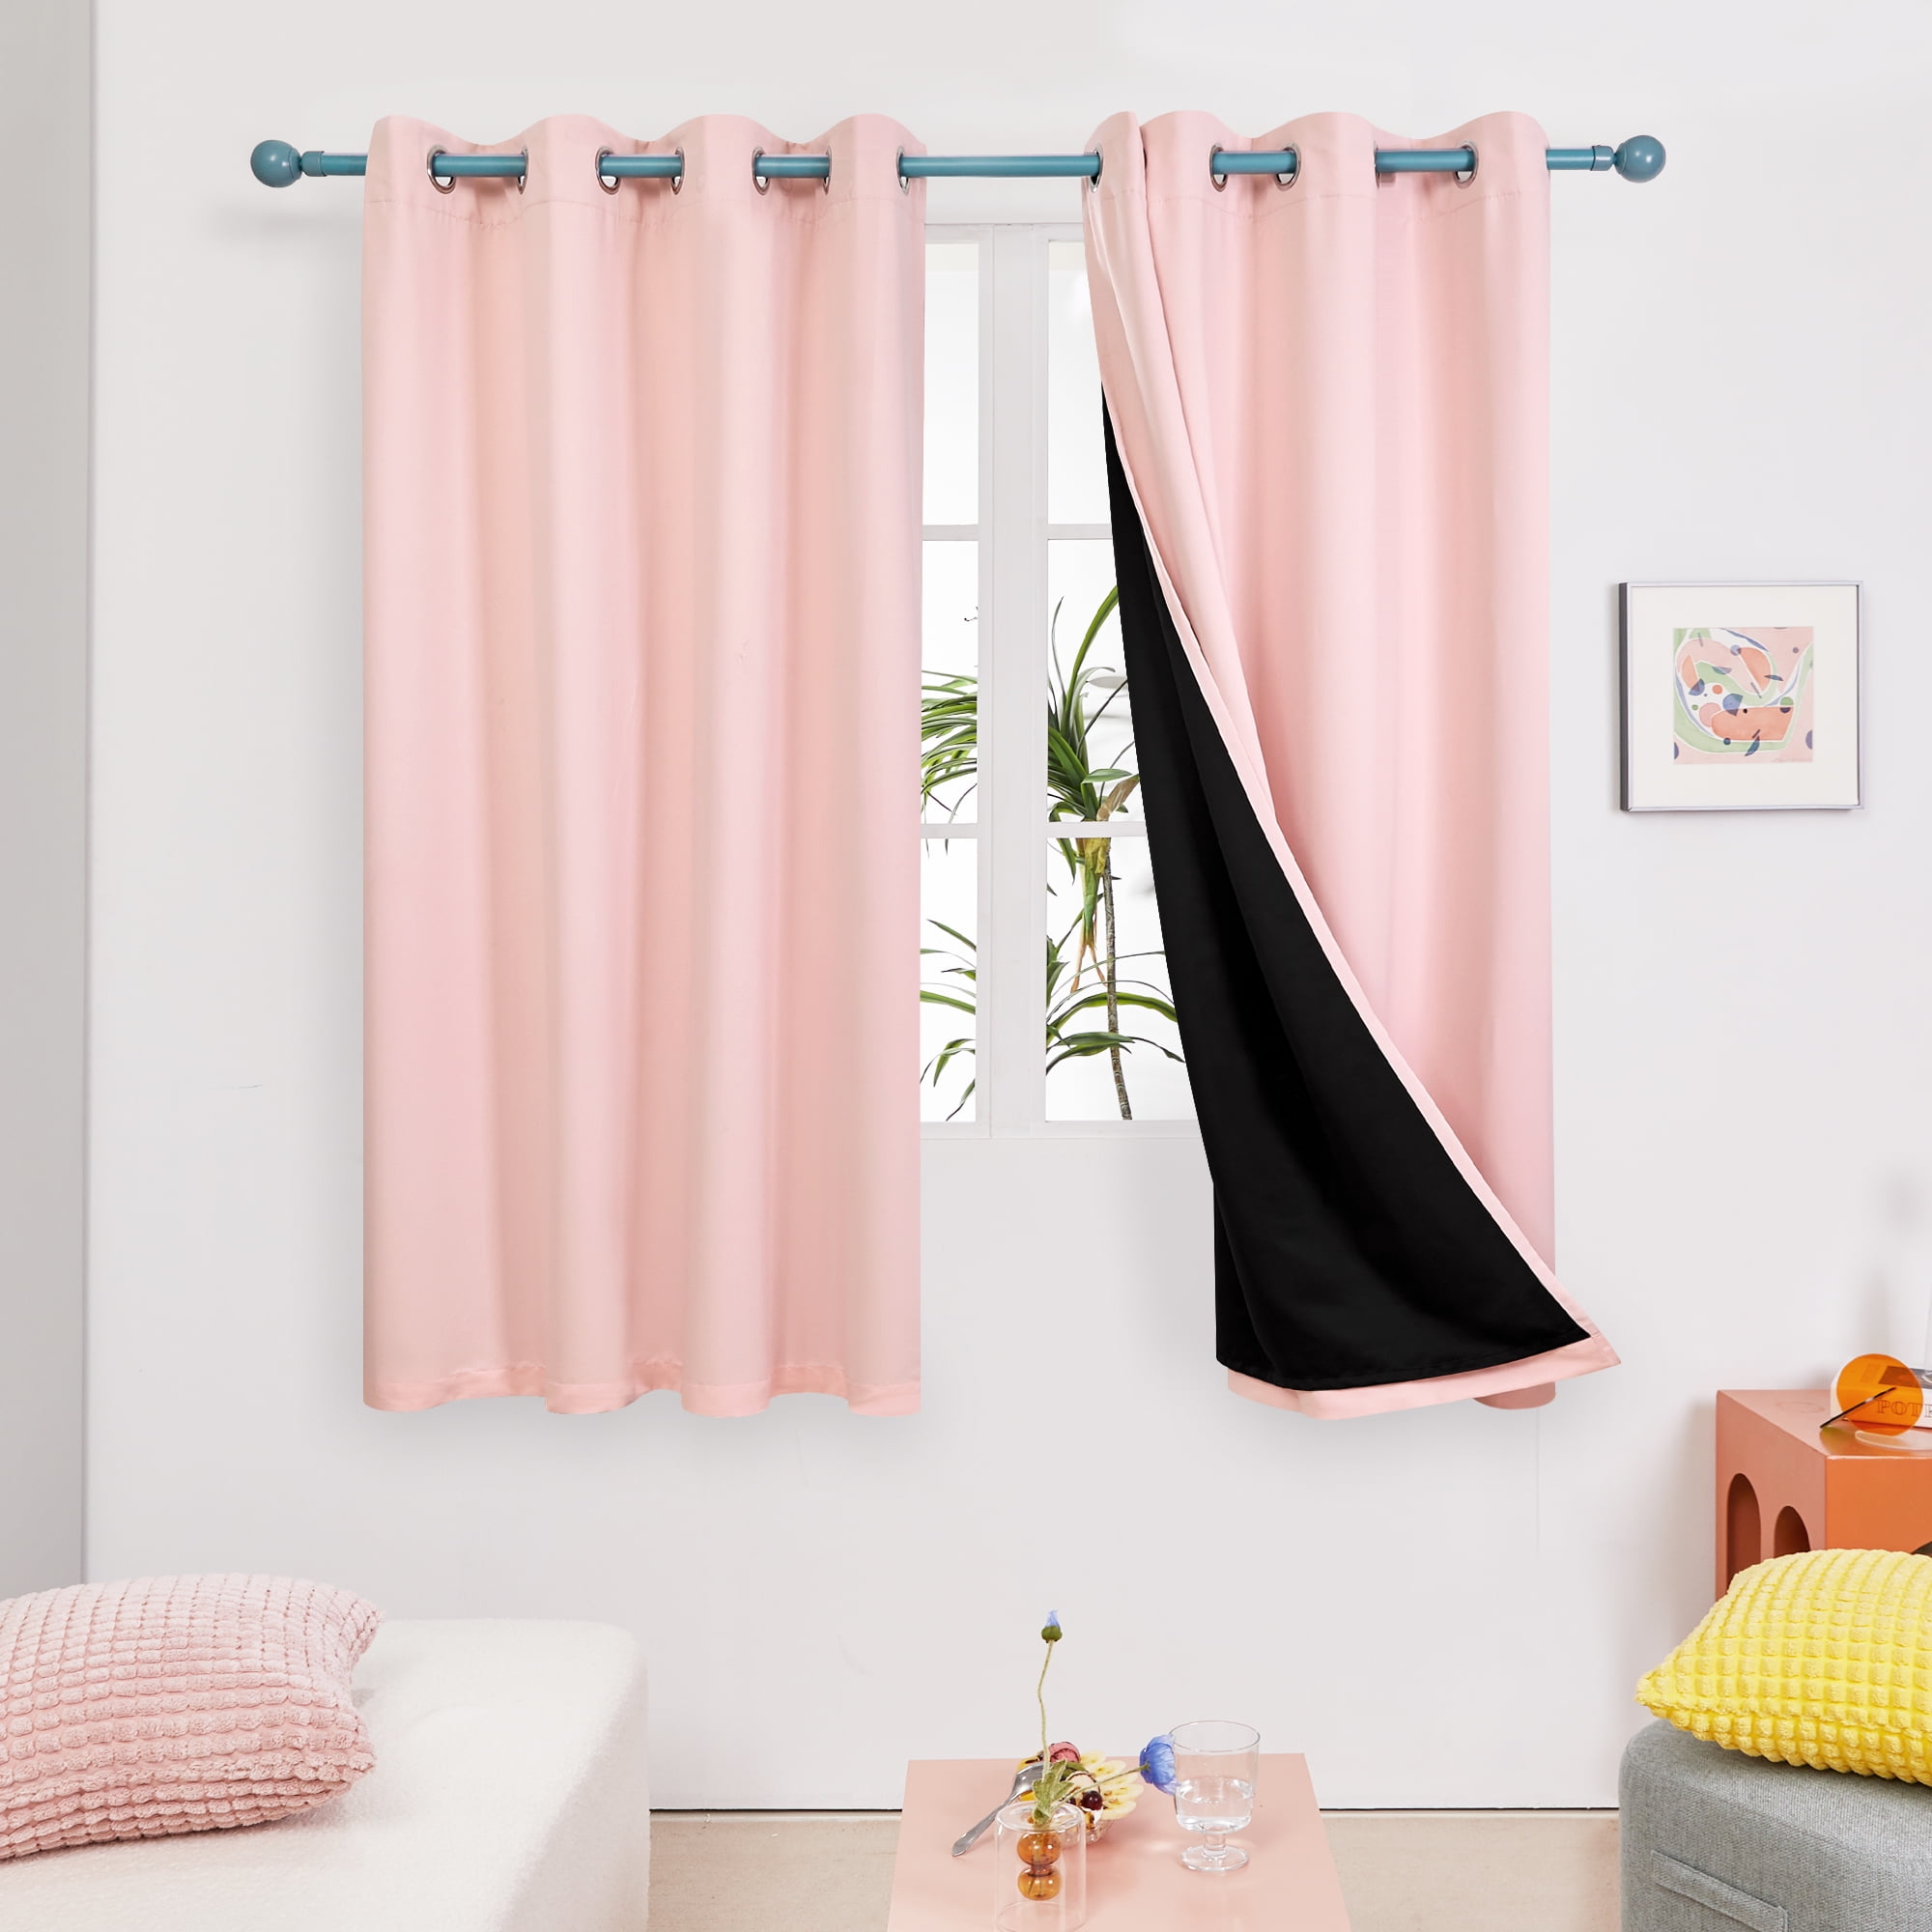 Details about   2 Panels Blackout Window Curtain Collection Light Blocking for Bedroom Room Gift 